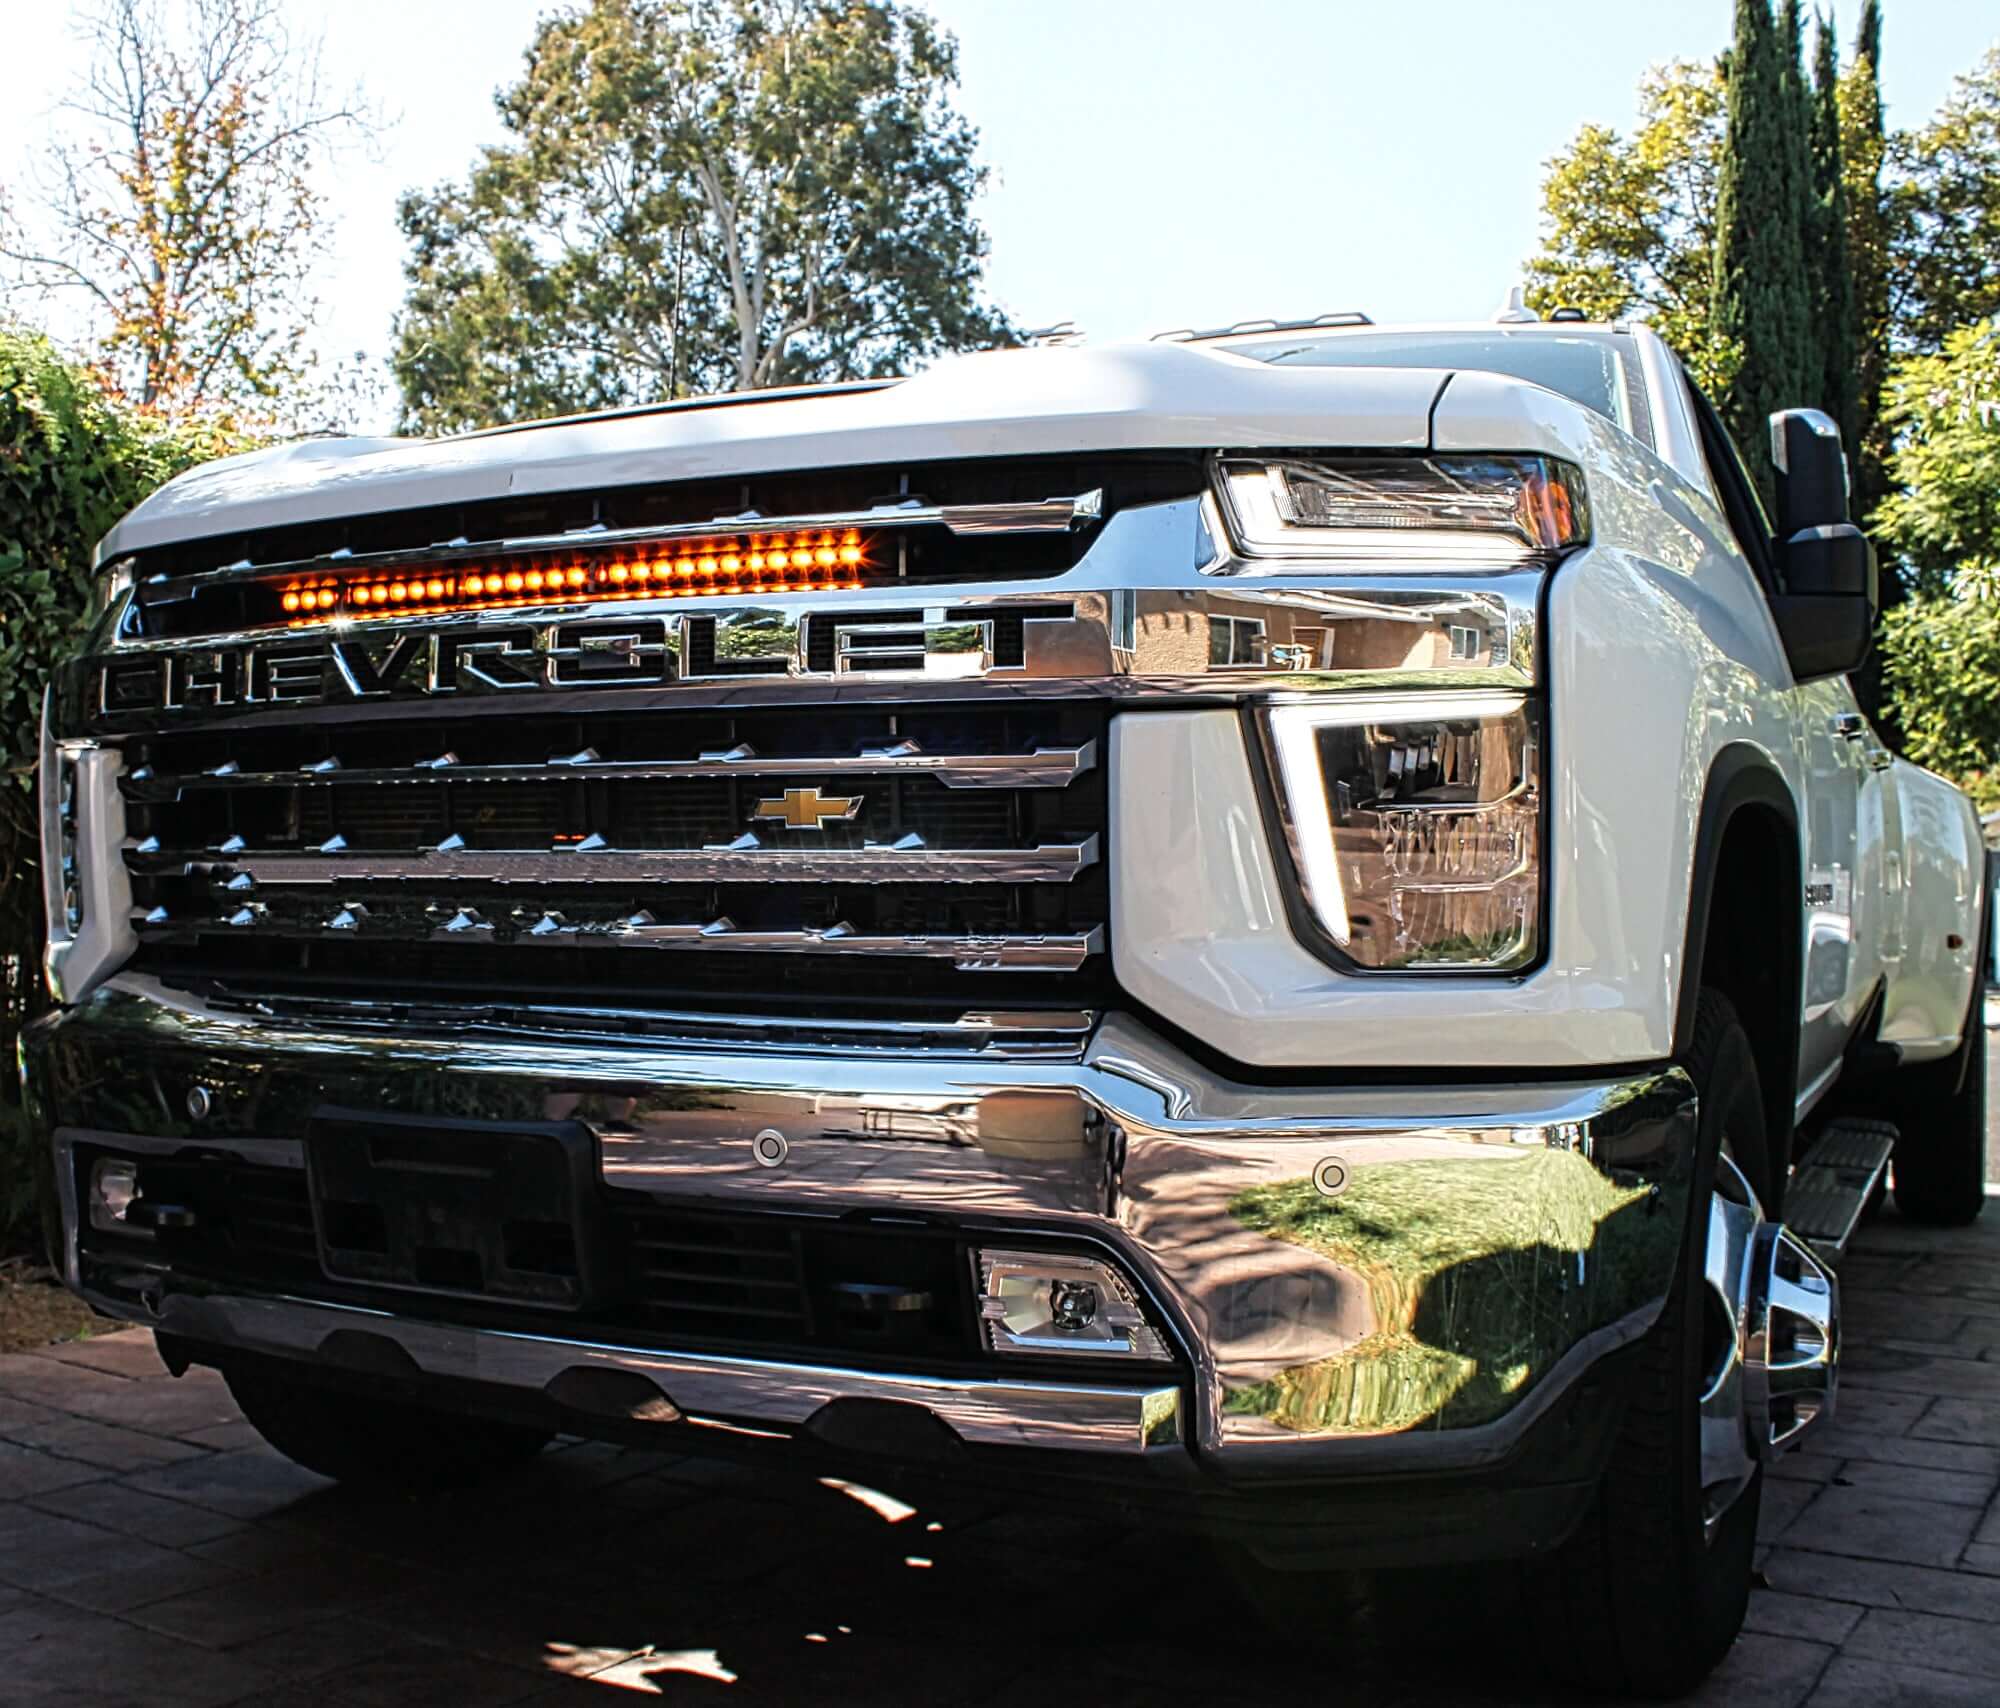 2020 2021 2022 2023 white Chevrolet Silverado 2500/3500HD one amber 30in Light Bar behind the grille- M&R Automotive